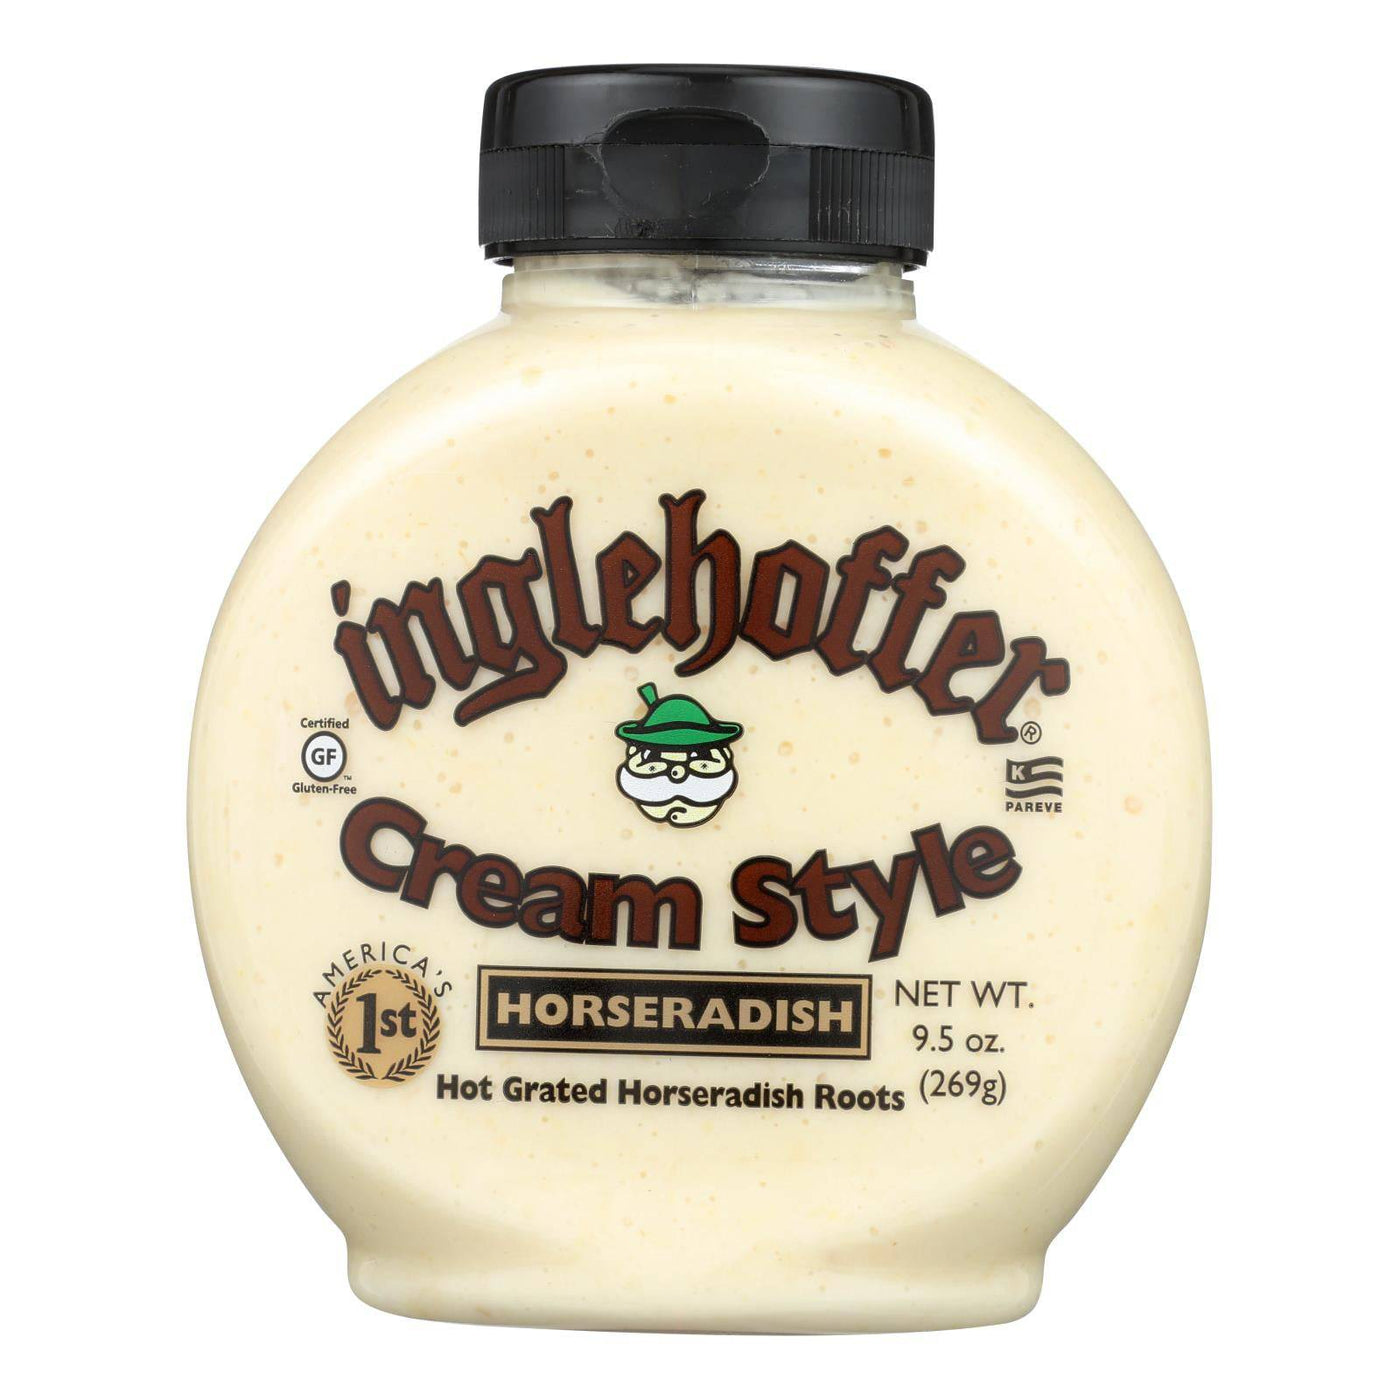 Buy Inglehoffer - Cream Style Horseradish - Case Of 6 - 9.5 Oz.  at OnlyNaturals.us